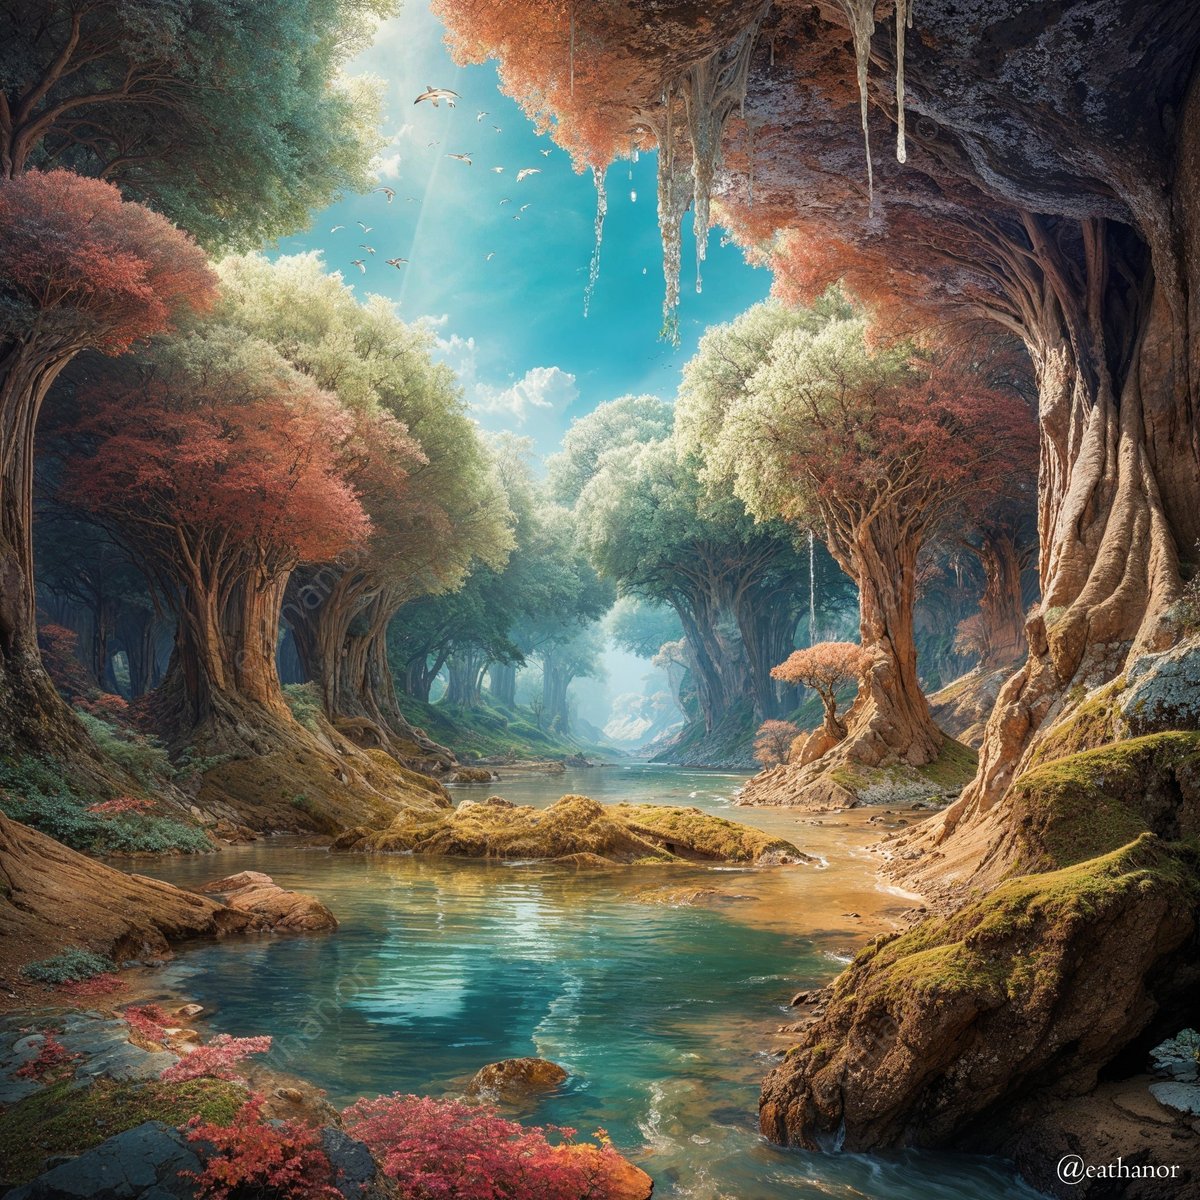 ~ Serene Haven ~

Step into the 'Serene Haven' 🌳💧 this Wednesday and find a moment of peace amidst the midweek rush. Wishing you all a day as tranquil as this place! 🍃

#midjourneyart #aiartcommunity #stablediffusion #FantasyLandscape #MidweekMotivation #GoodDayVibes